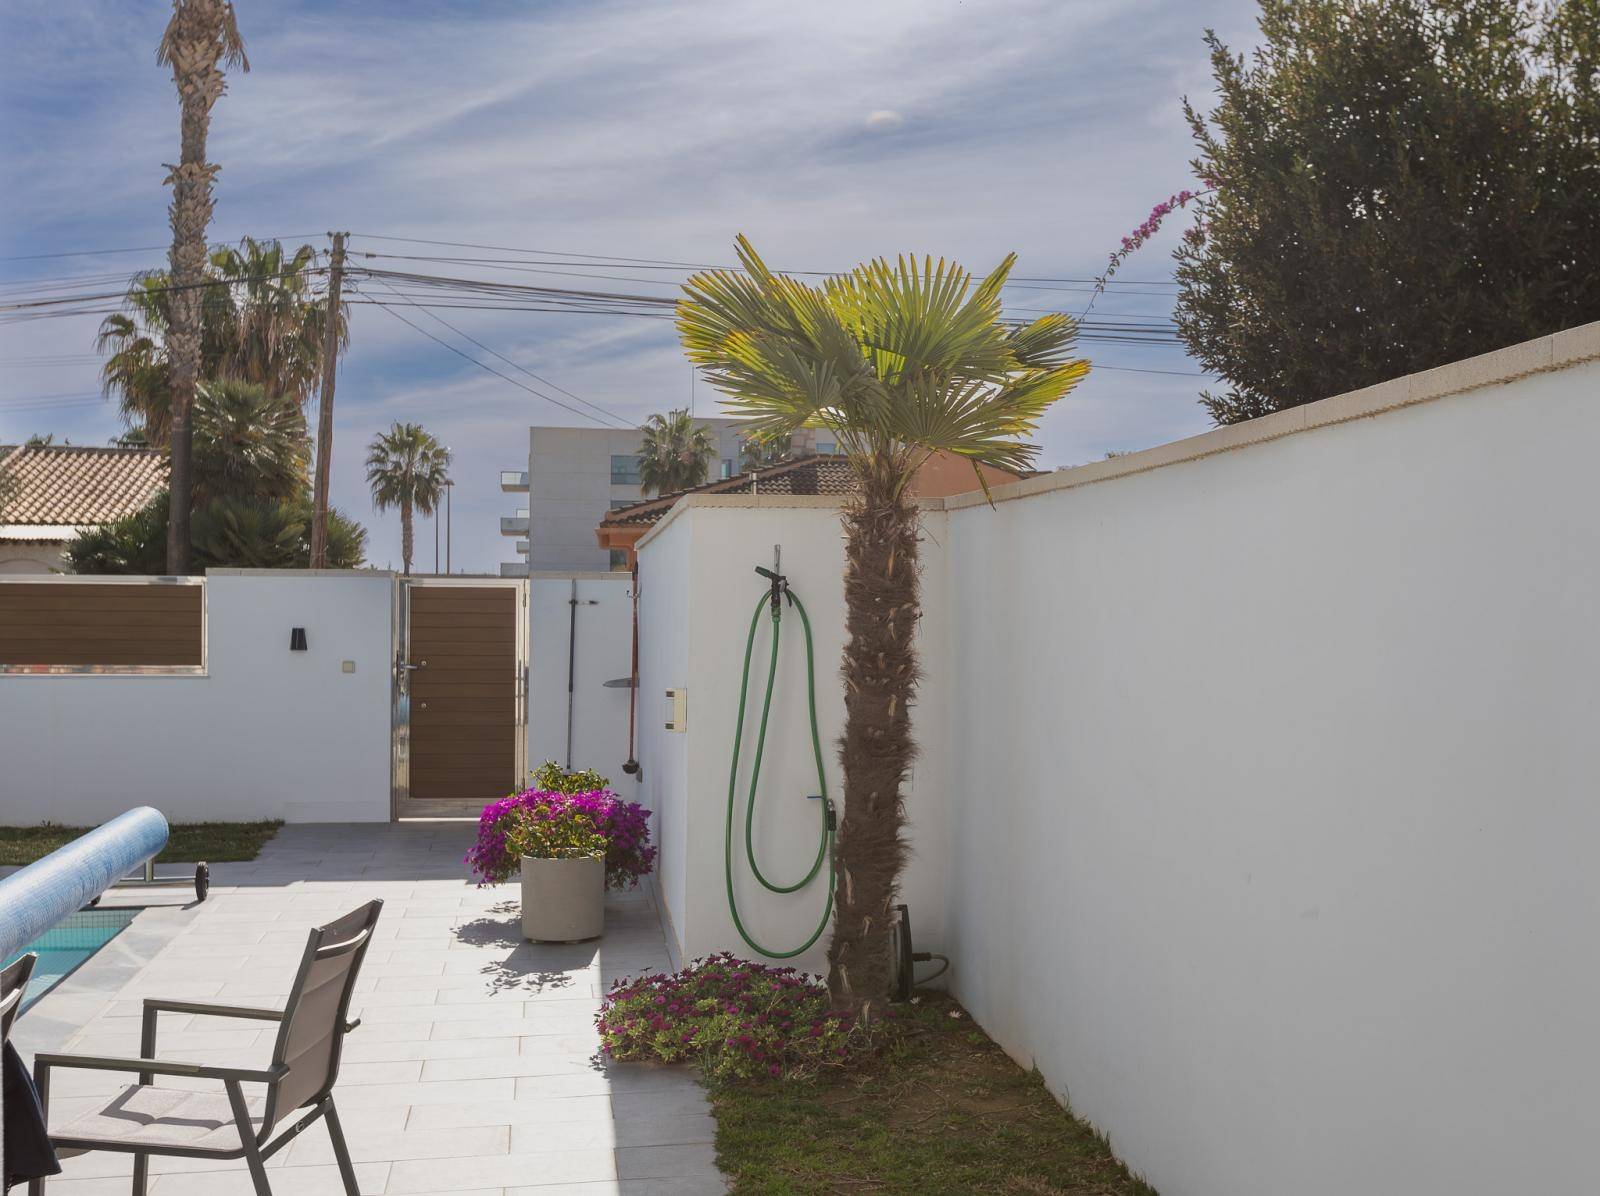 DETACHED VILLA IN URB. BALCONIES WITH HEATED POOL